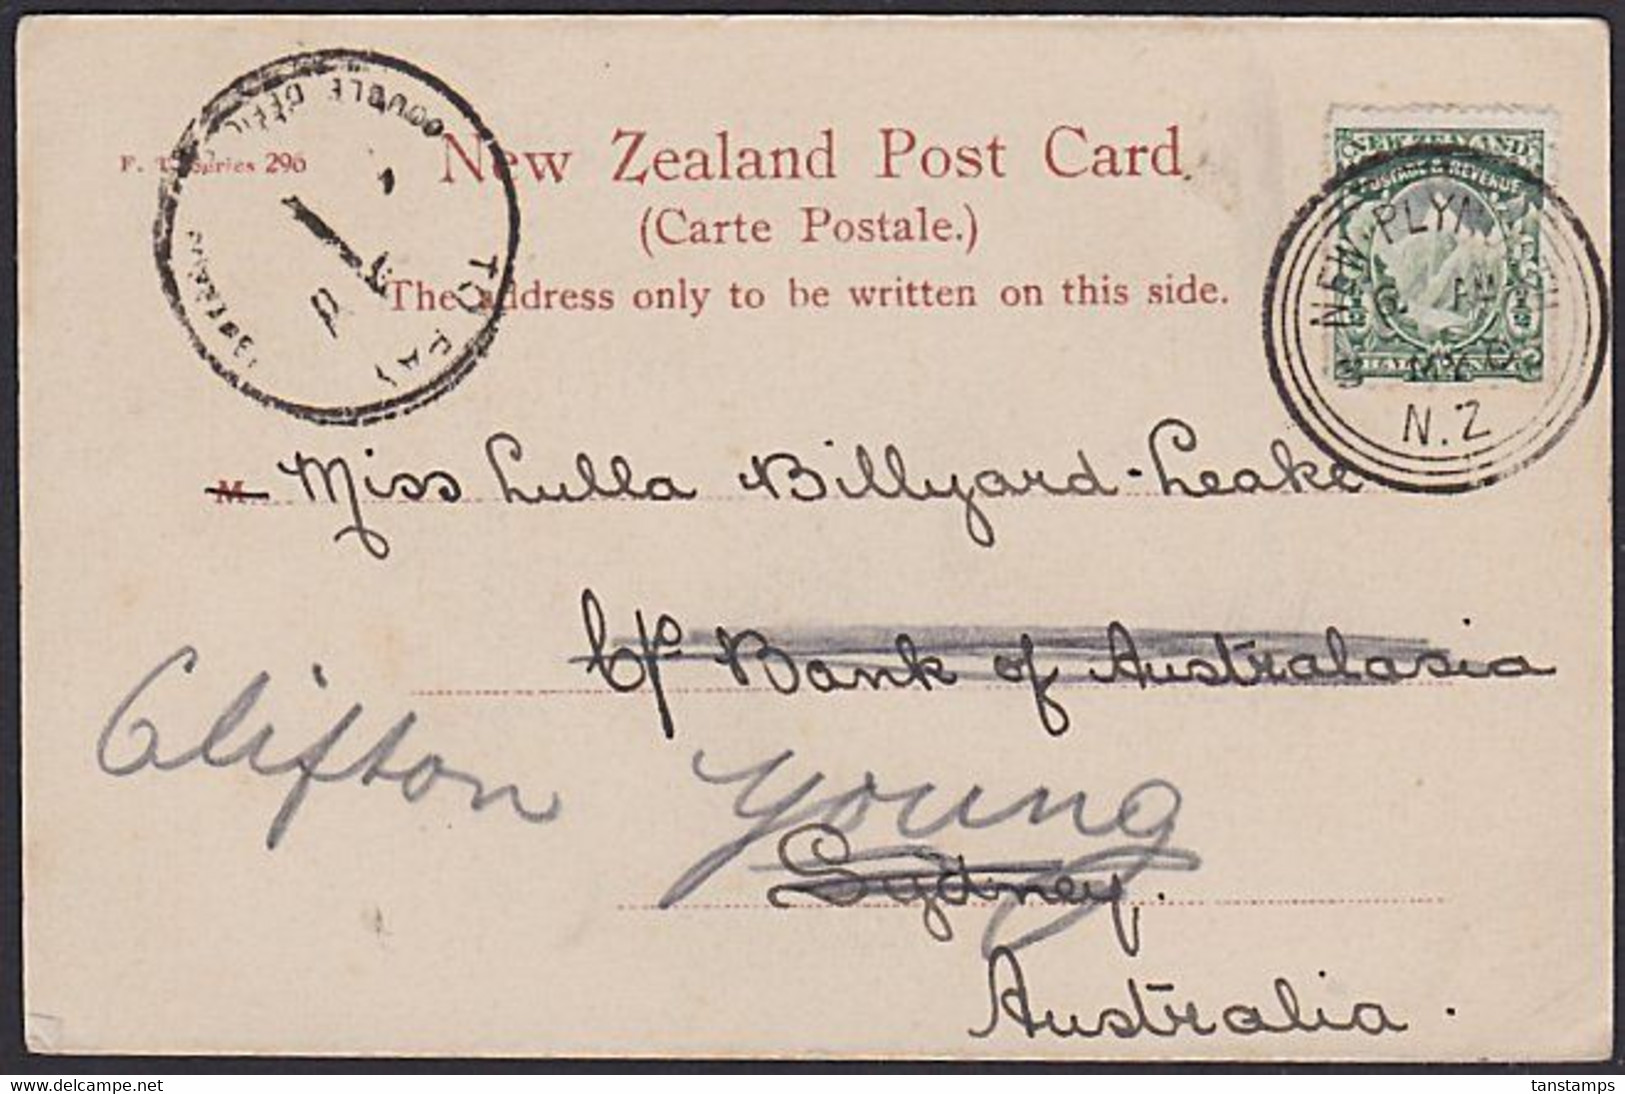 NEW PLYMOUTH BREAKWATER NZ 1905 POSTCARD DOUBLE DEFICIENCY 1d TO PAY POSTMARK - Briefe U. Dokumente